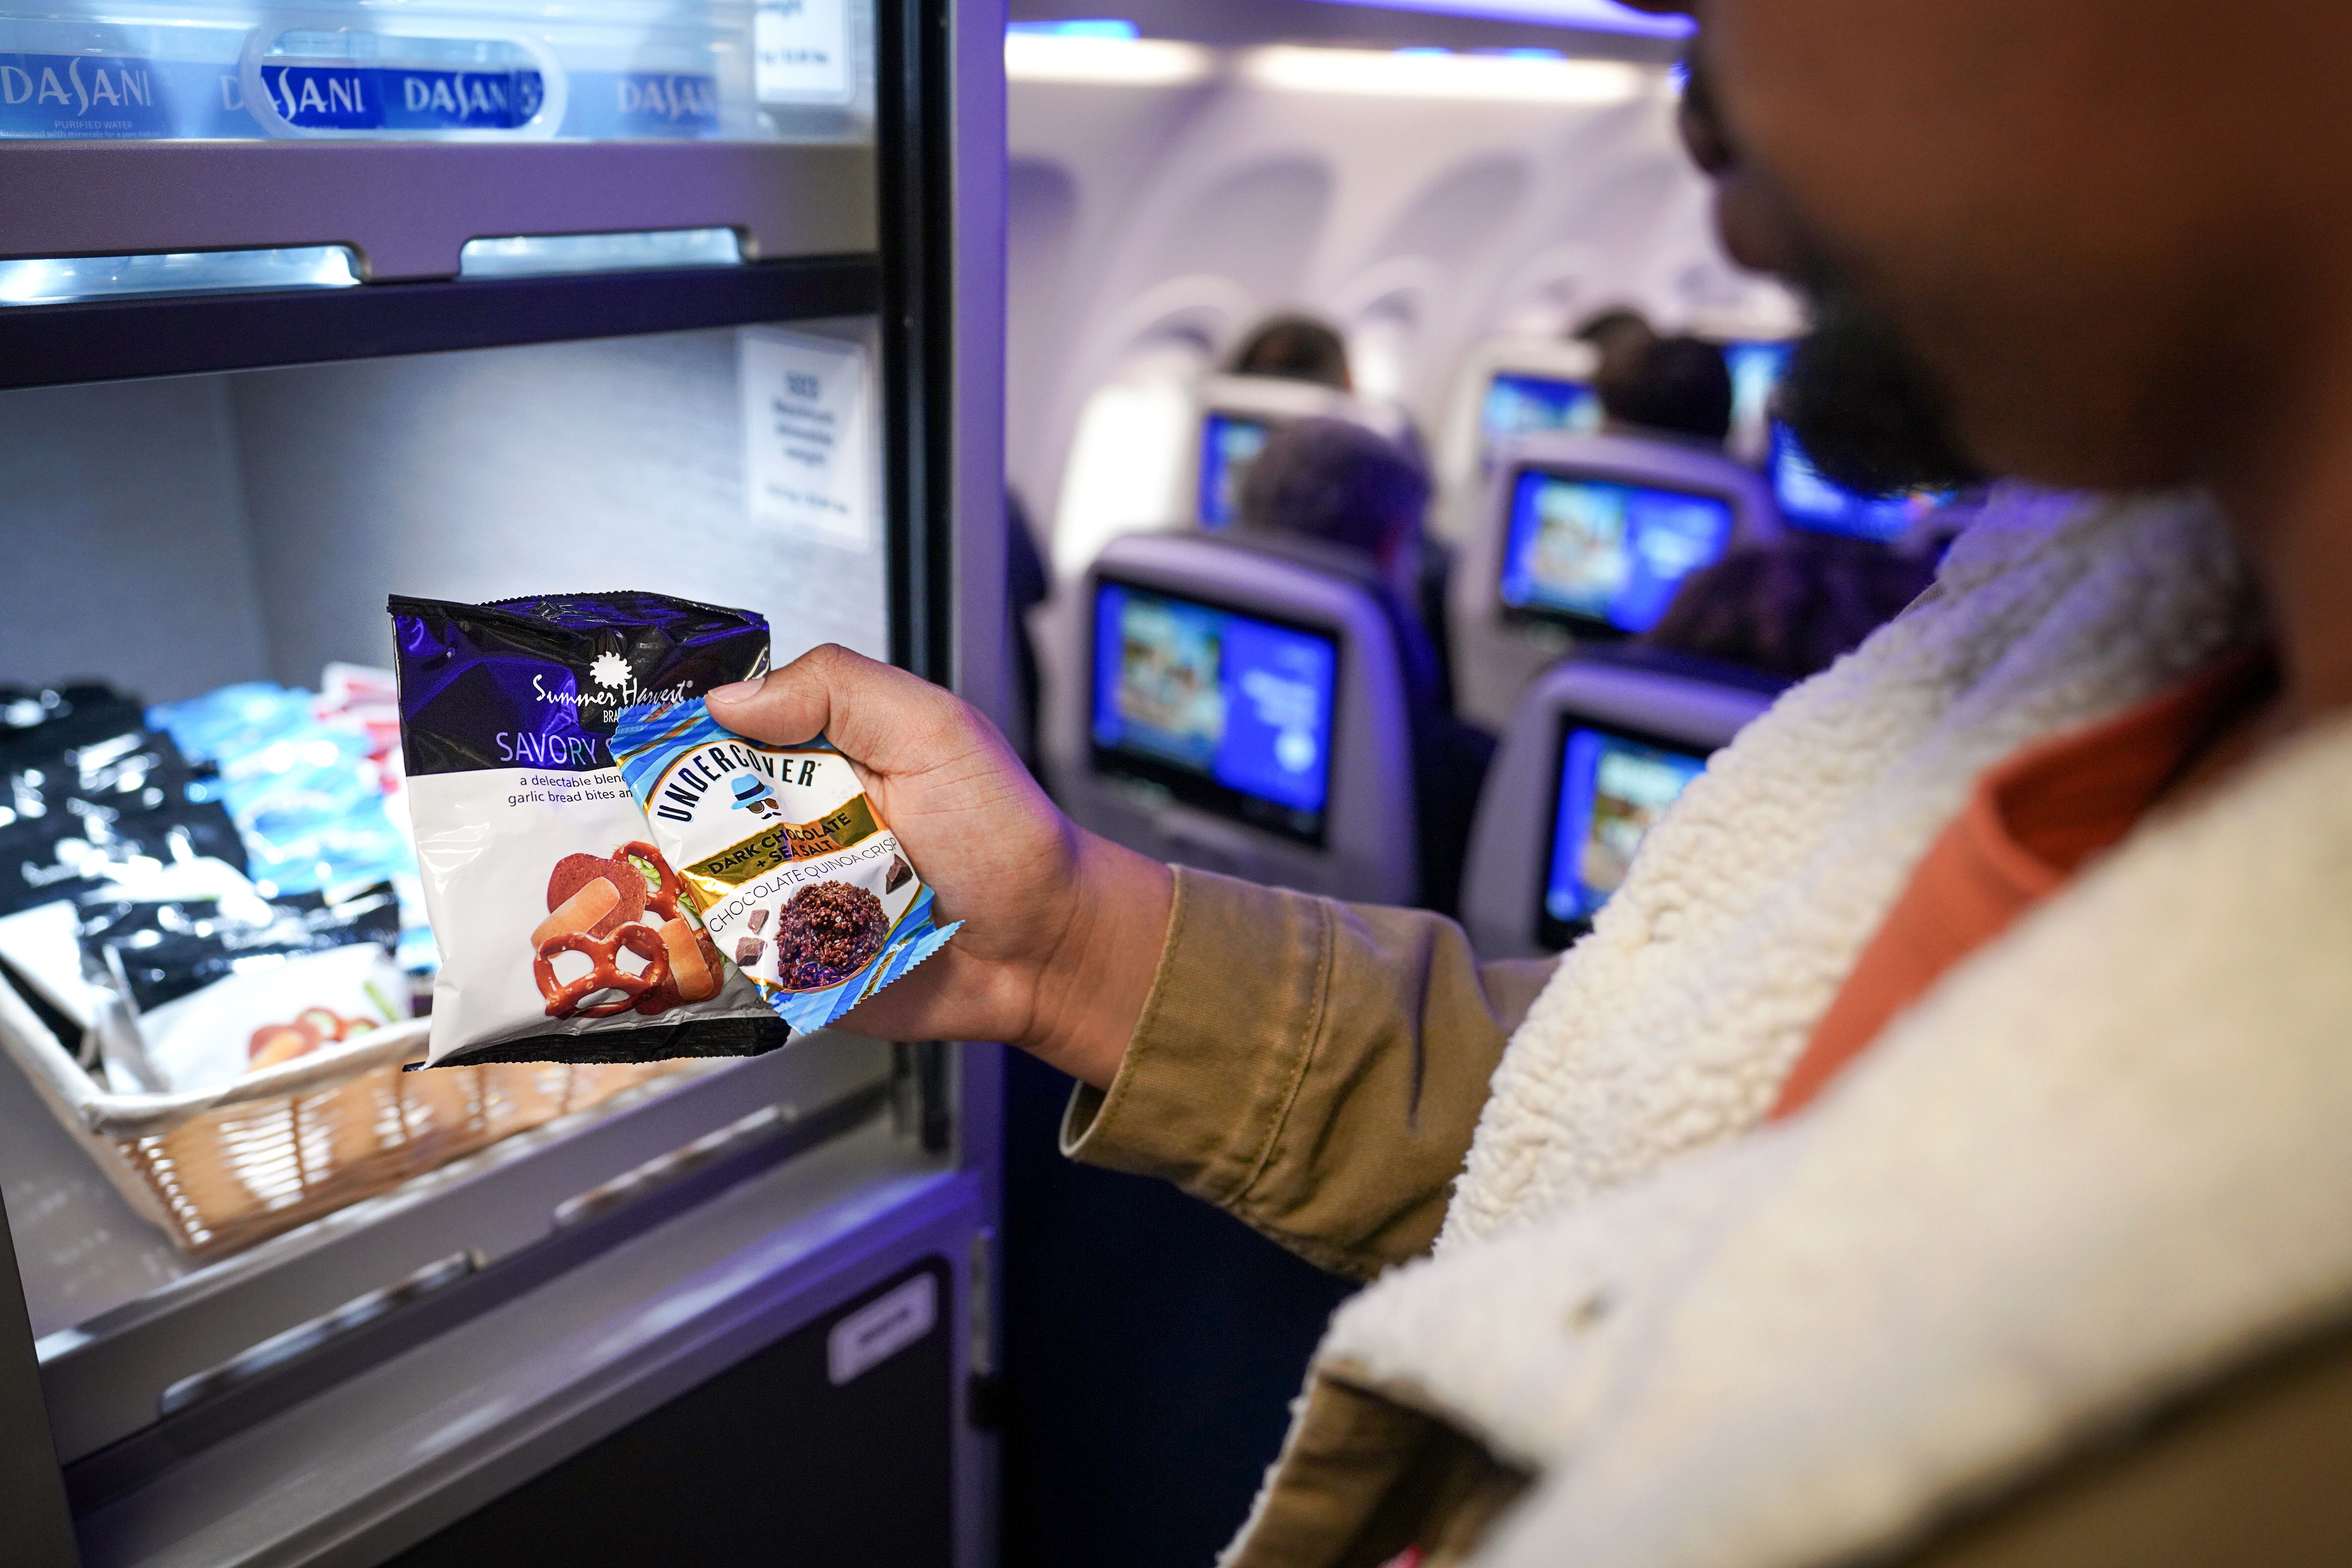 United Airlines roll out new 'Grab-N-Go' snack station on select